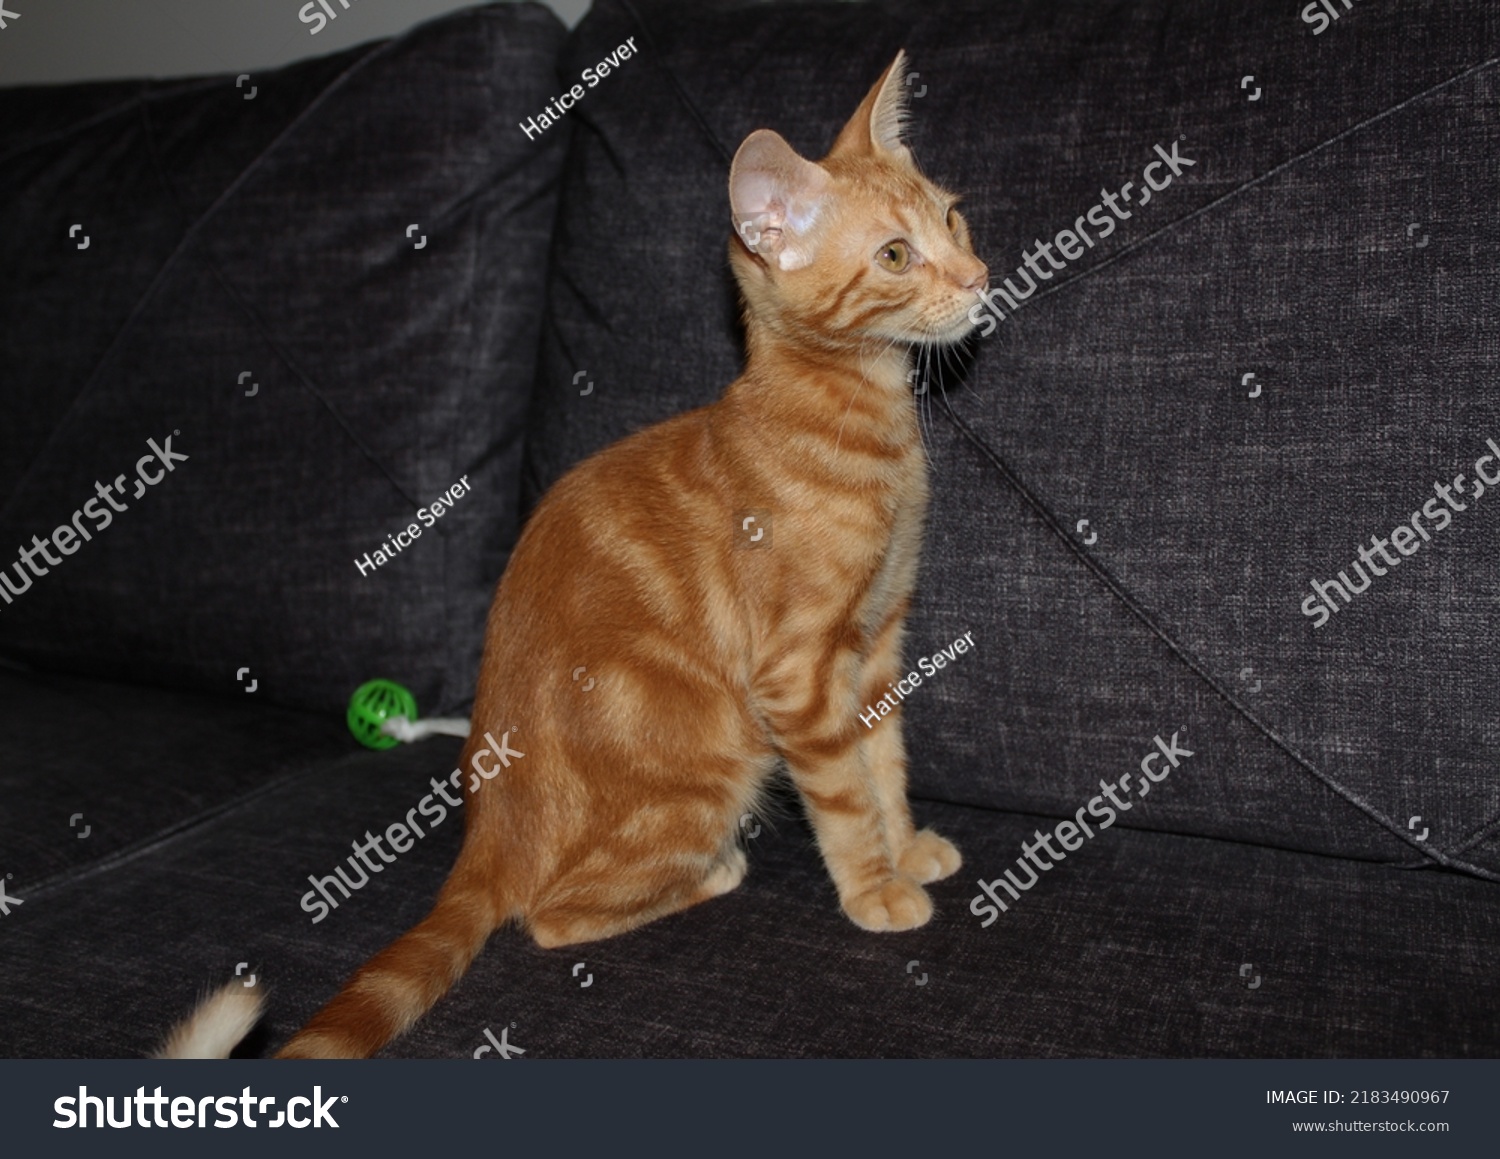 close-up shot of a playful orange fluffy kitten on couch, photo of an orange fluffy tabby kitten, folded paw, curled paws #2183490967